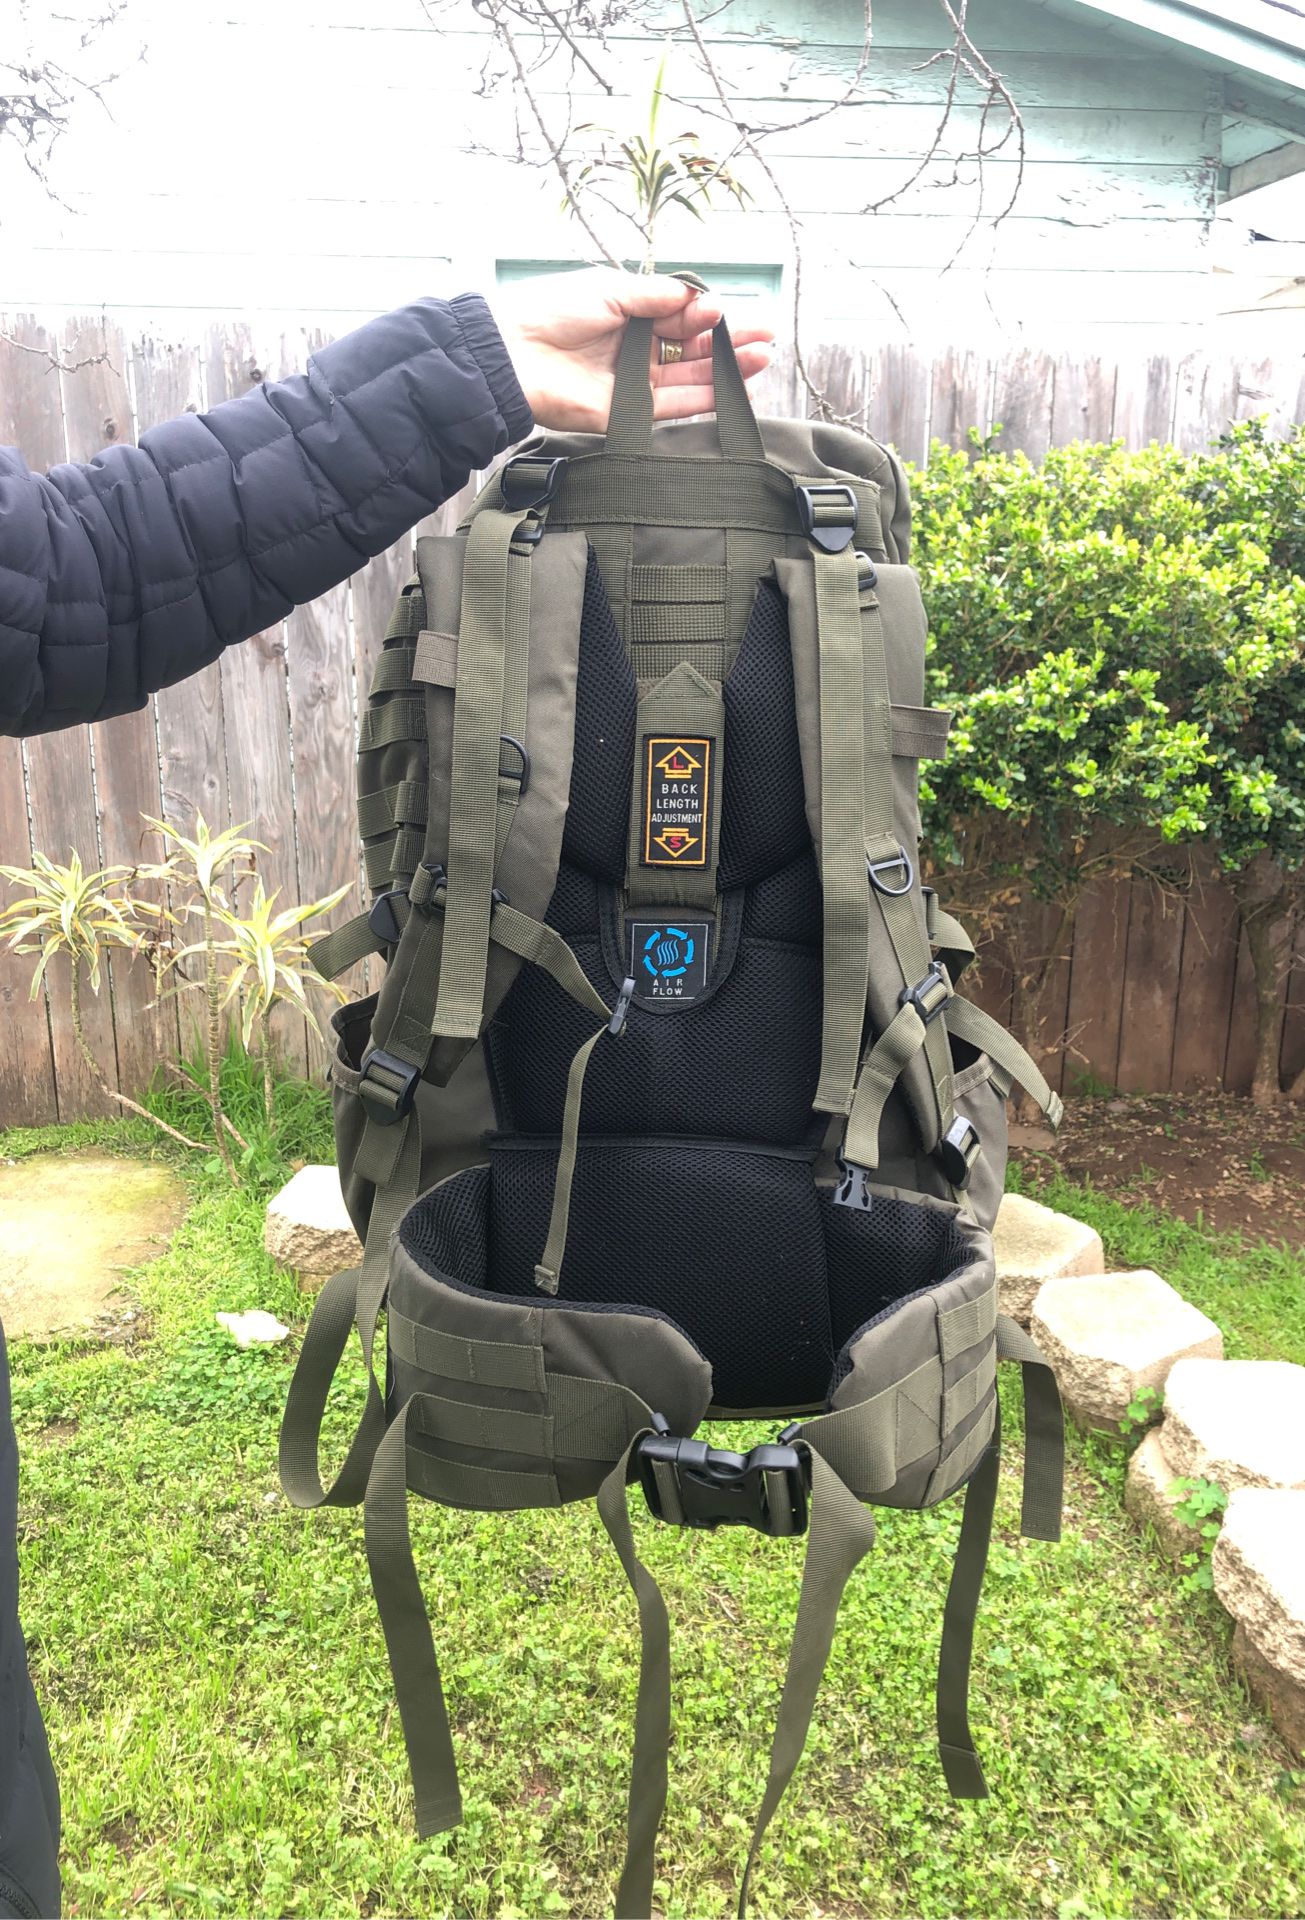 Rugged Exposure Delta 65 Hiking Pack